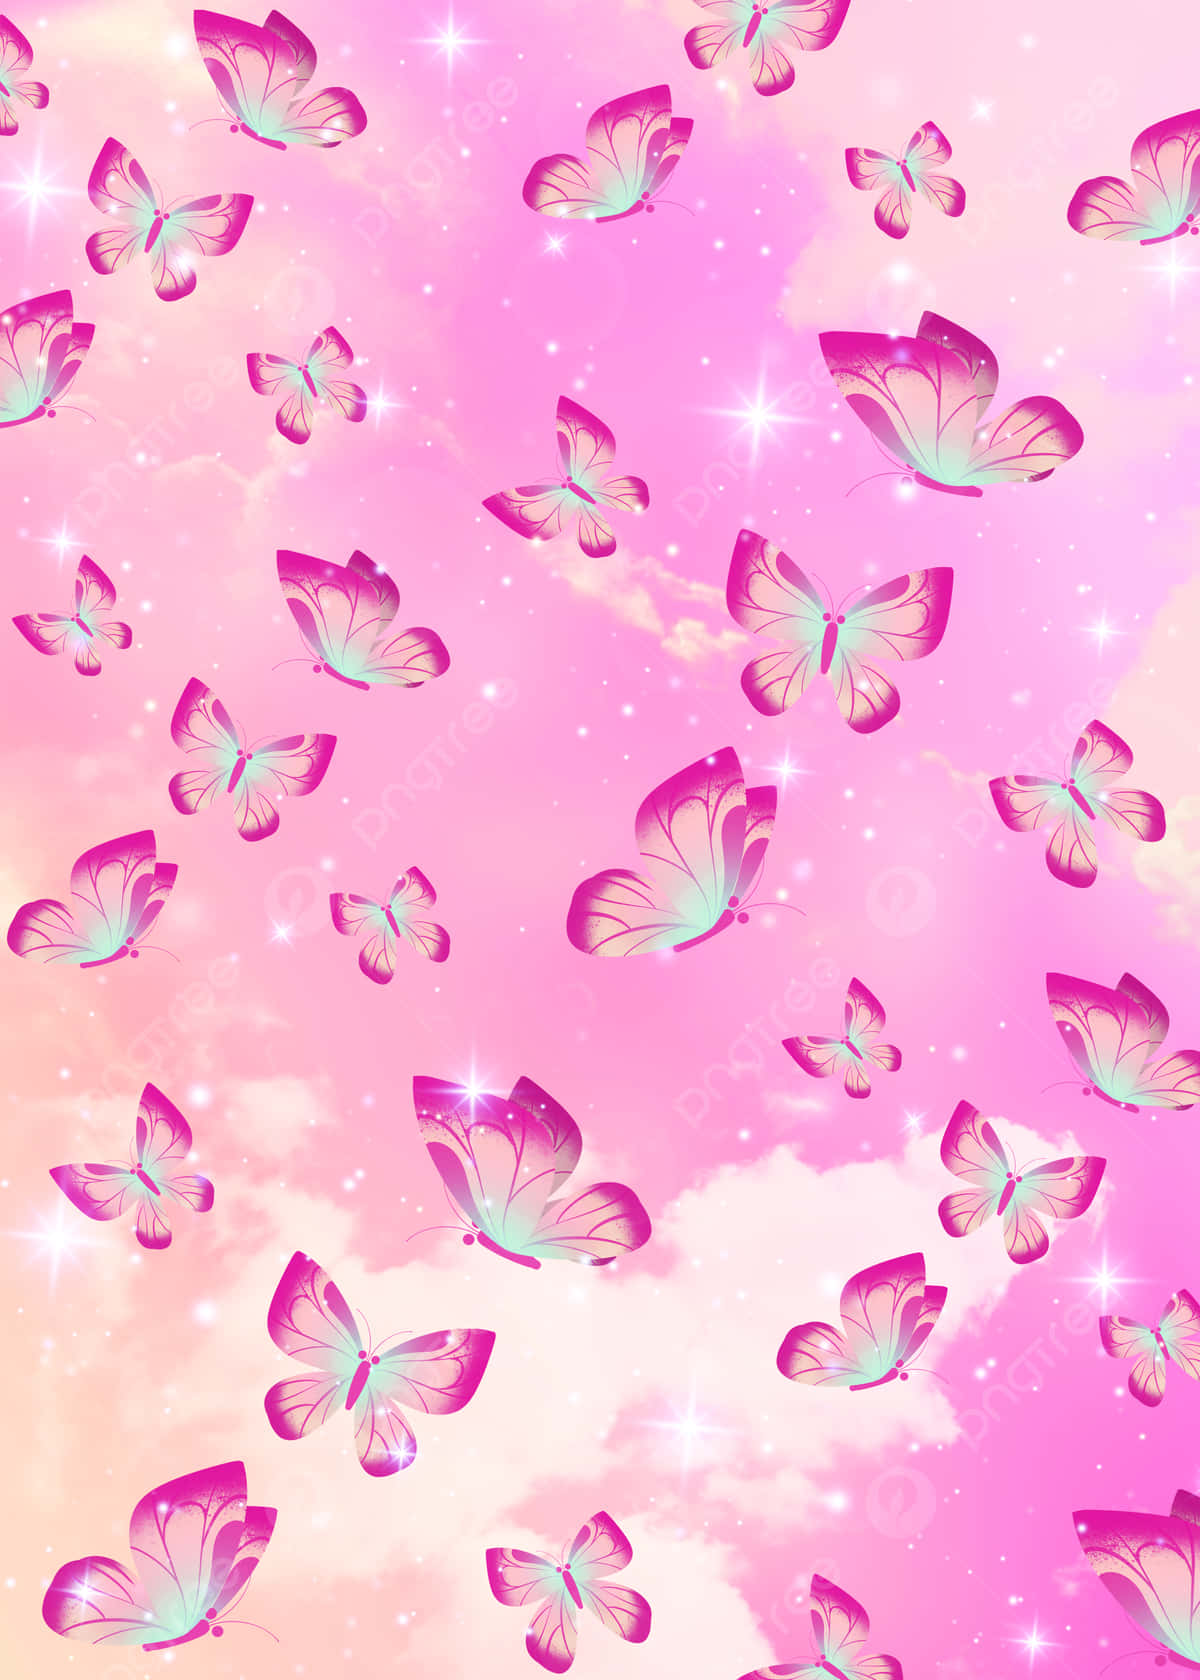 Download Red Pink Butterfly Design Wallpaper | Wallpapers.com